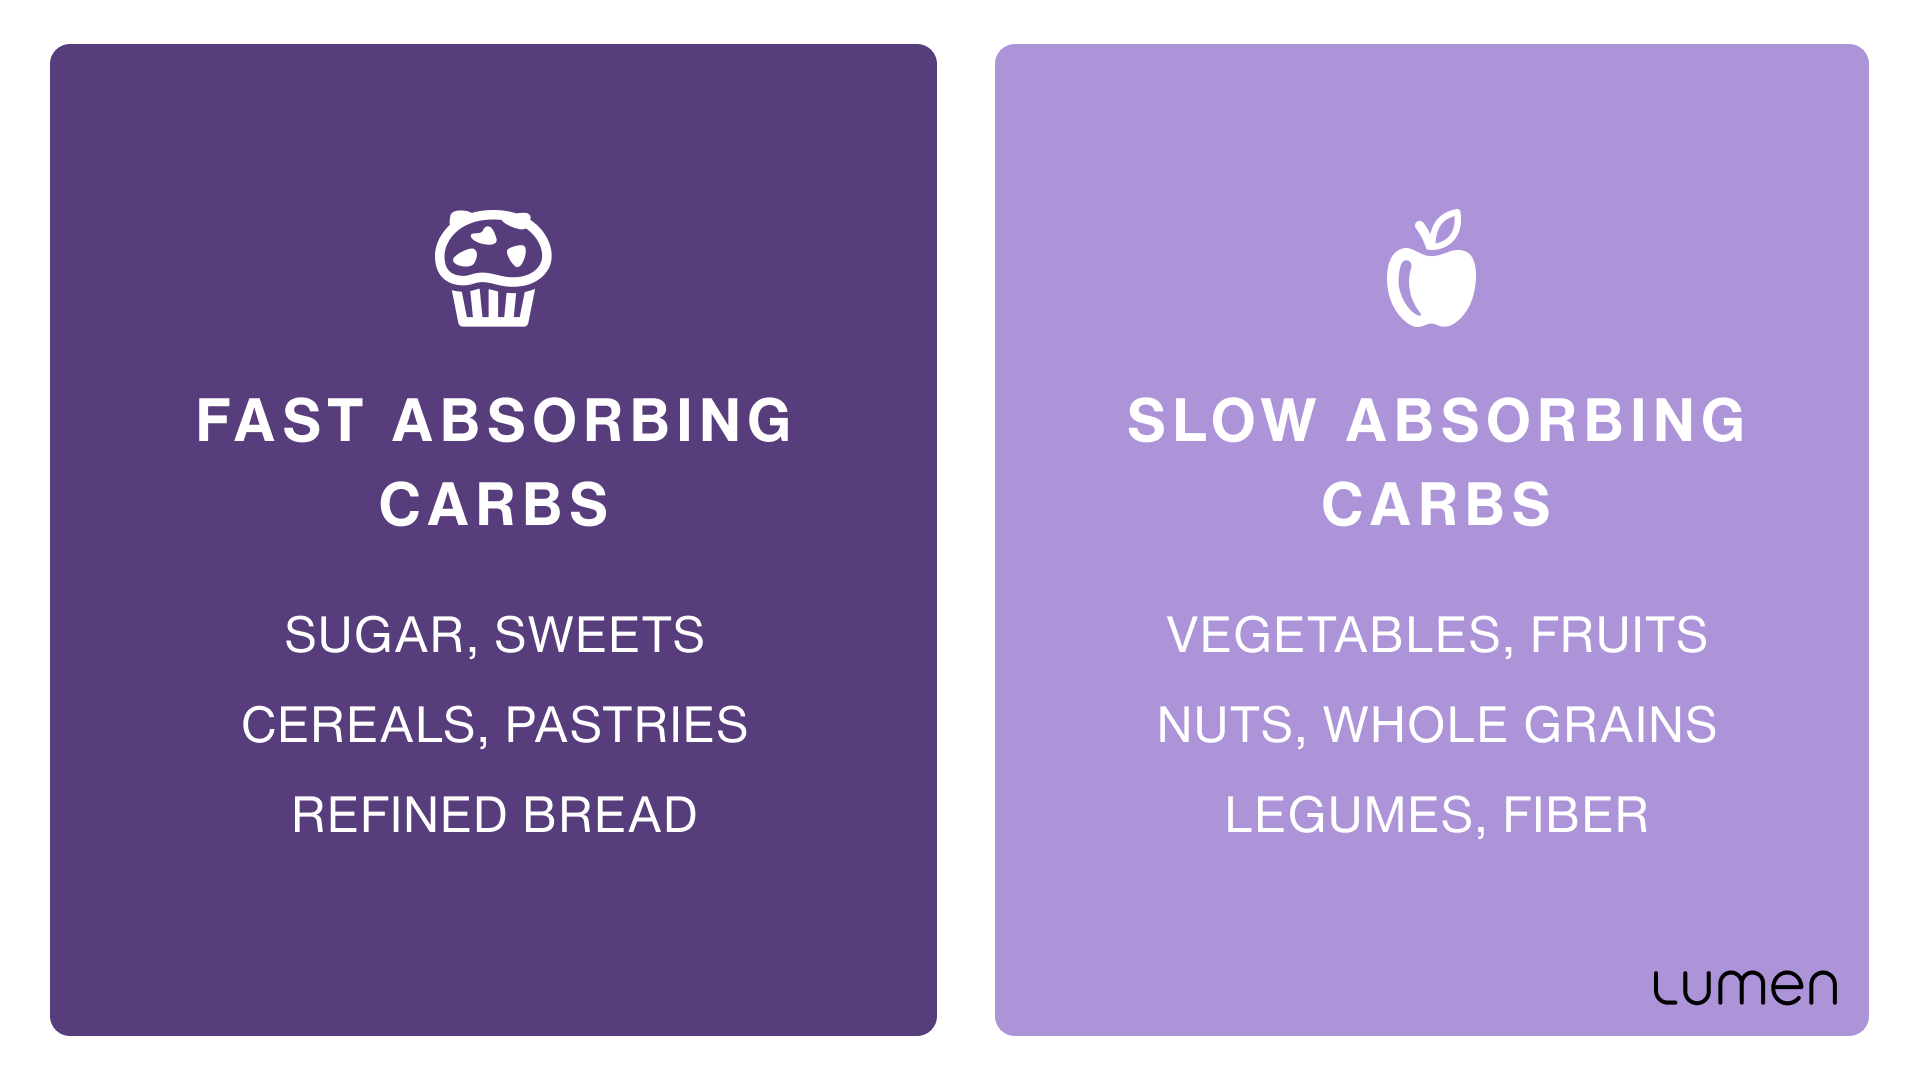 types of carbohydrates